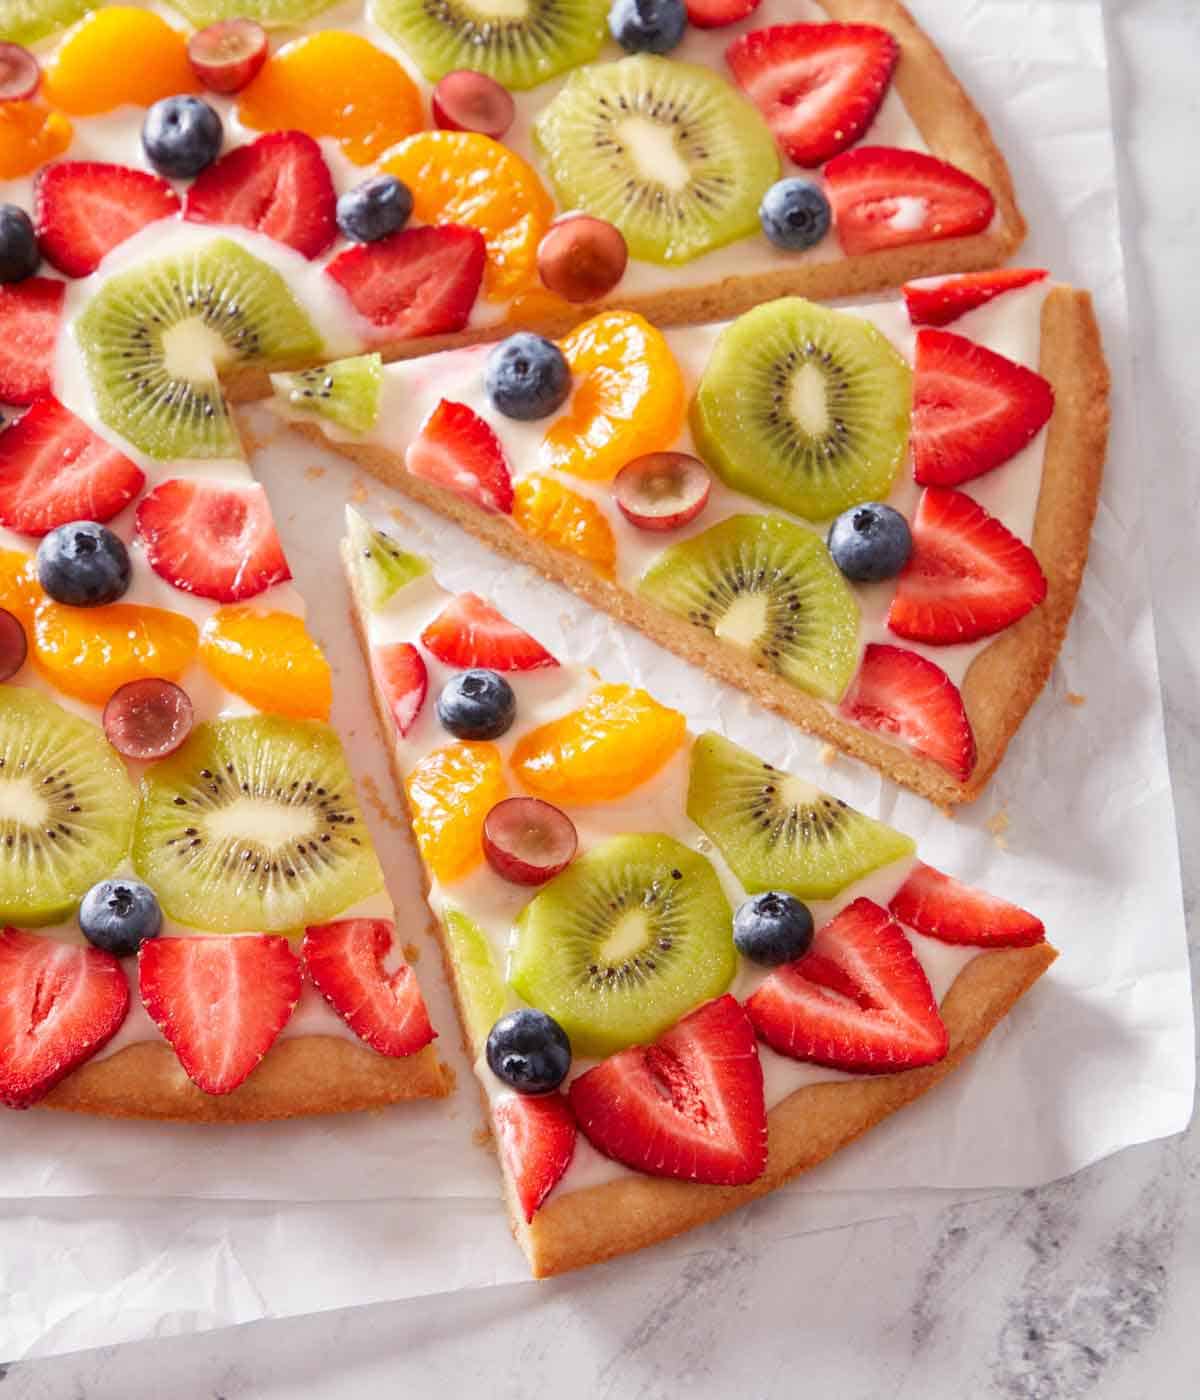 A fruit pizza on parchment paper with two slices cut and slightly pulled out.